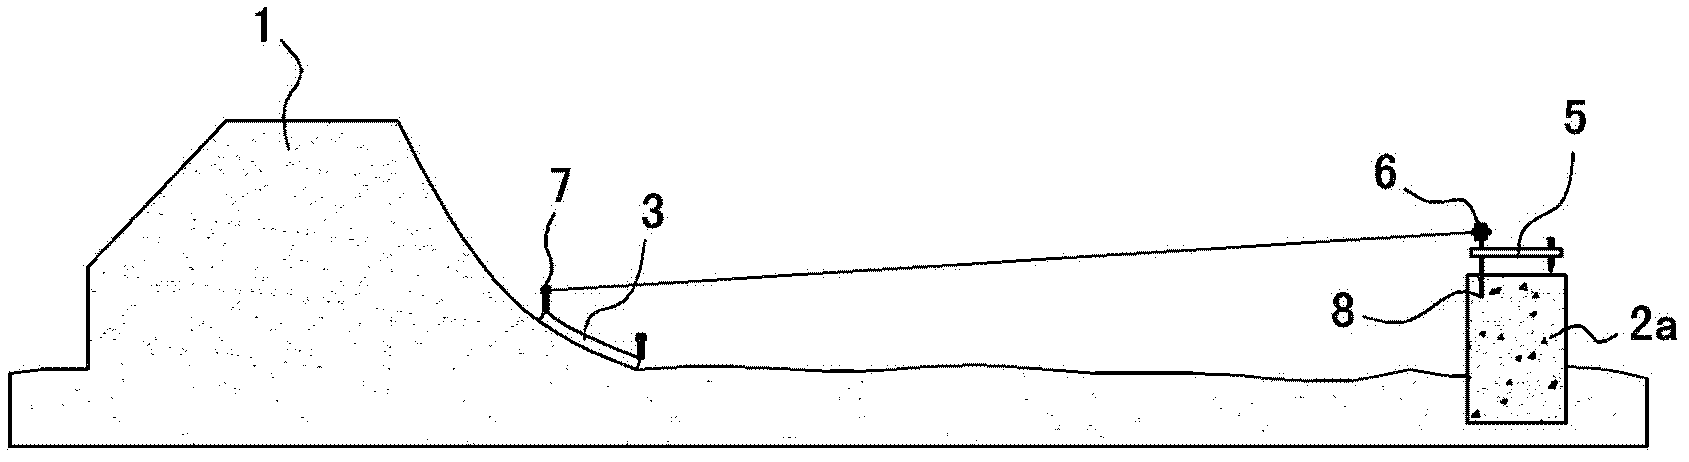 Pavement construction lofting method for high-speed loop in skid pad